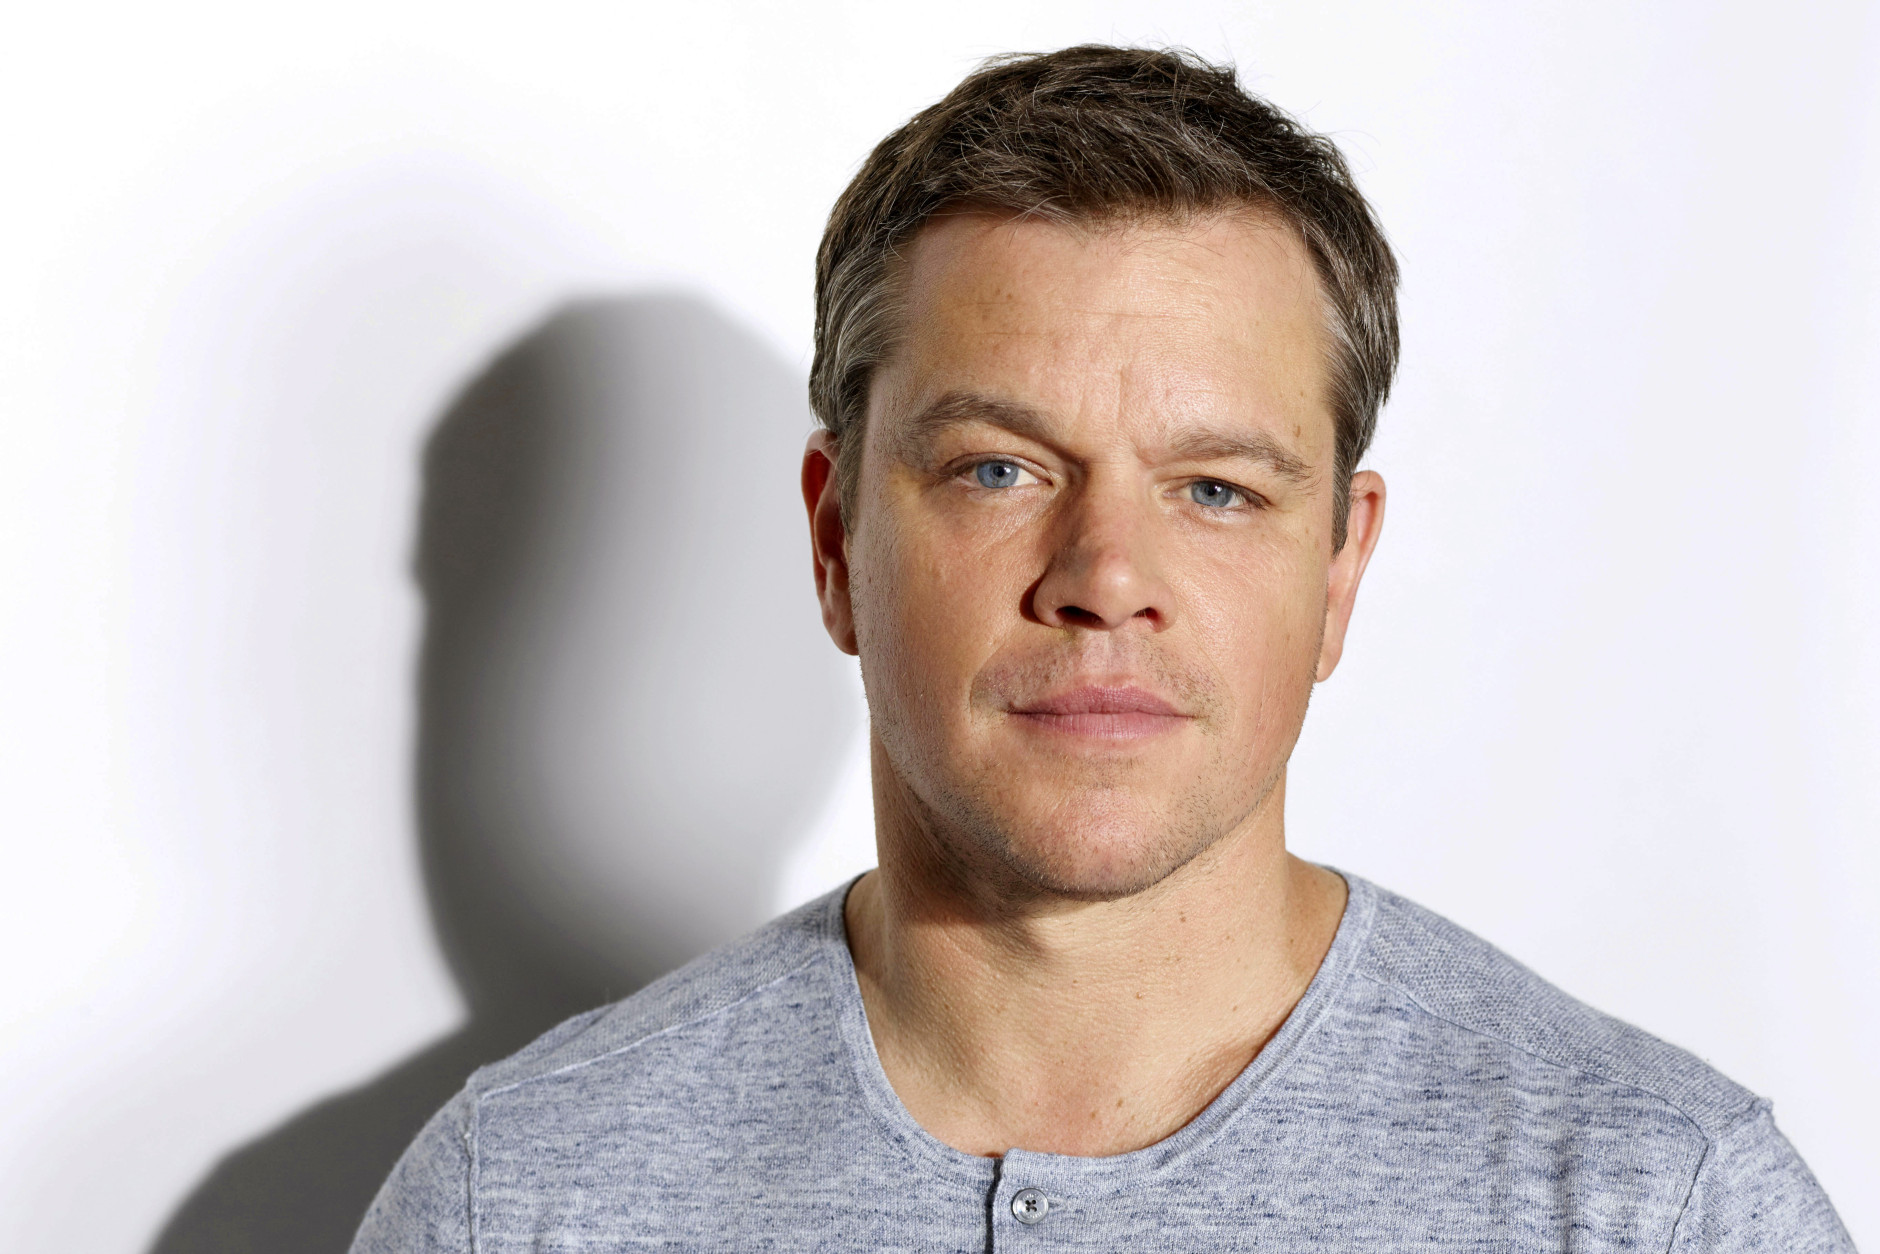 In this July 25, 2016 photo, actor Matt Damon poses for a portrait in Los Angeles to promote his latest film, "Jason Bourne." (Photo by Matt Sayles/Invision/AP)